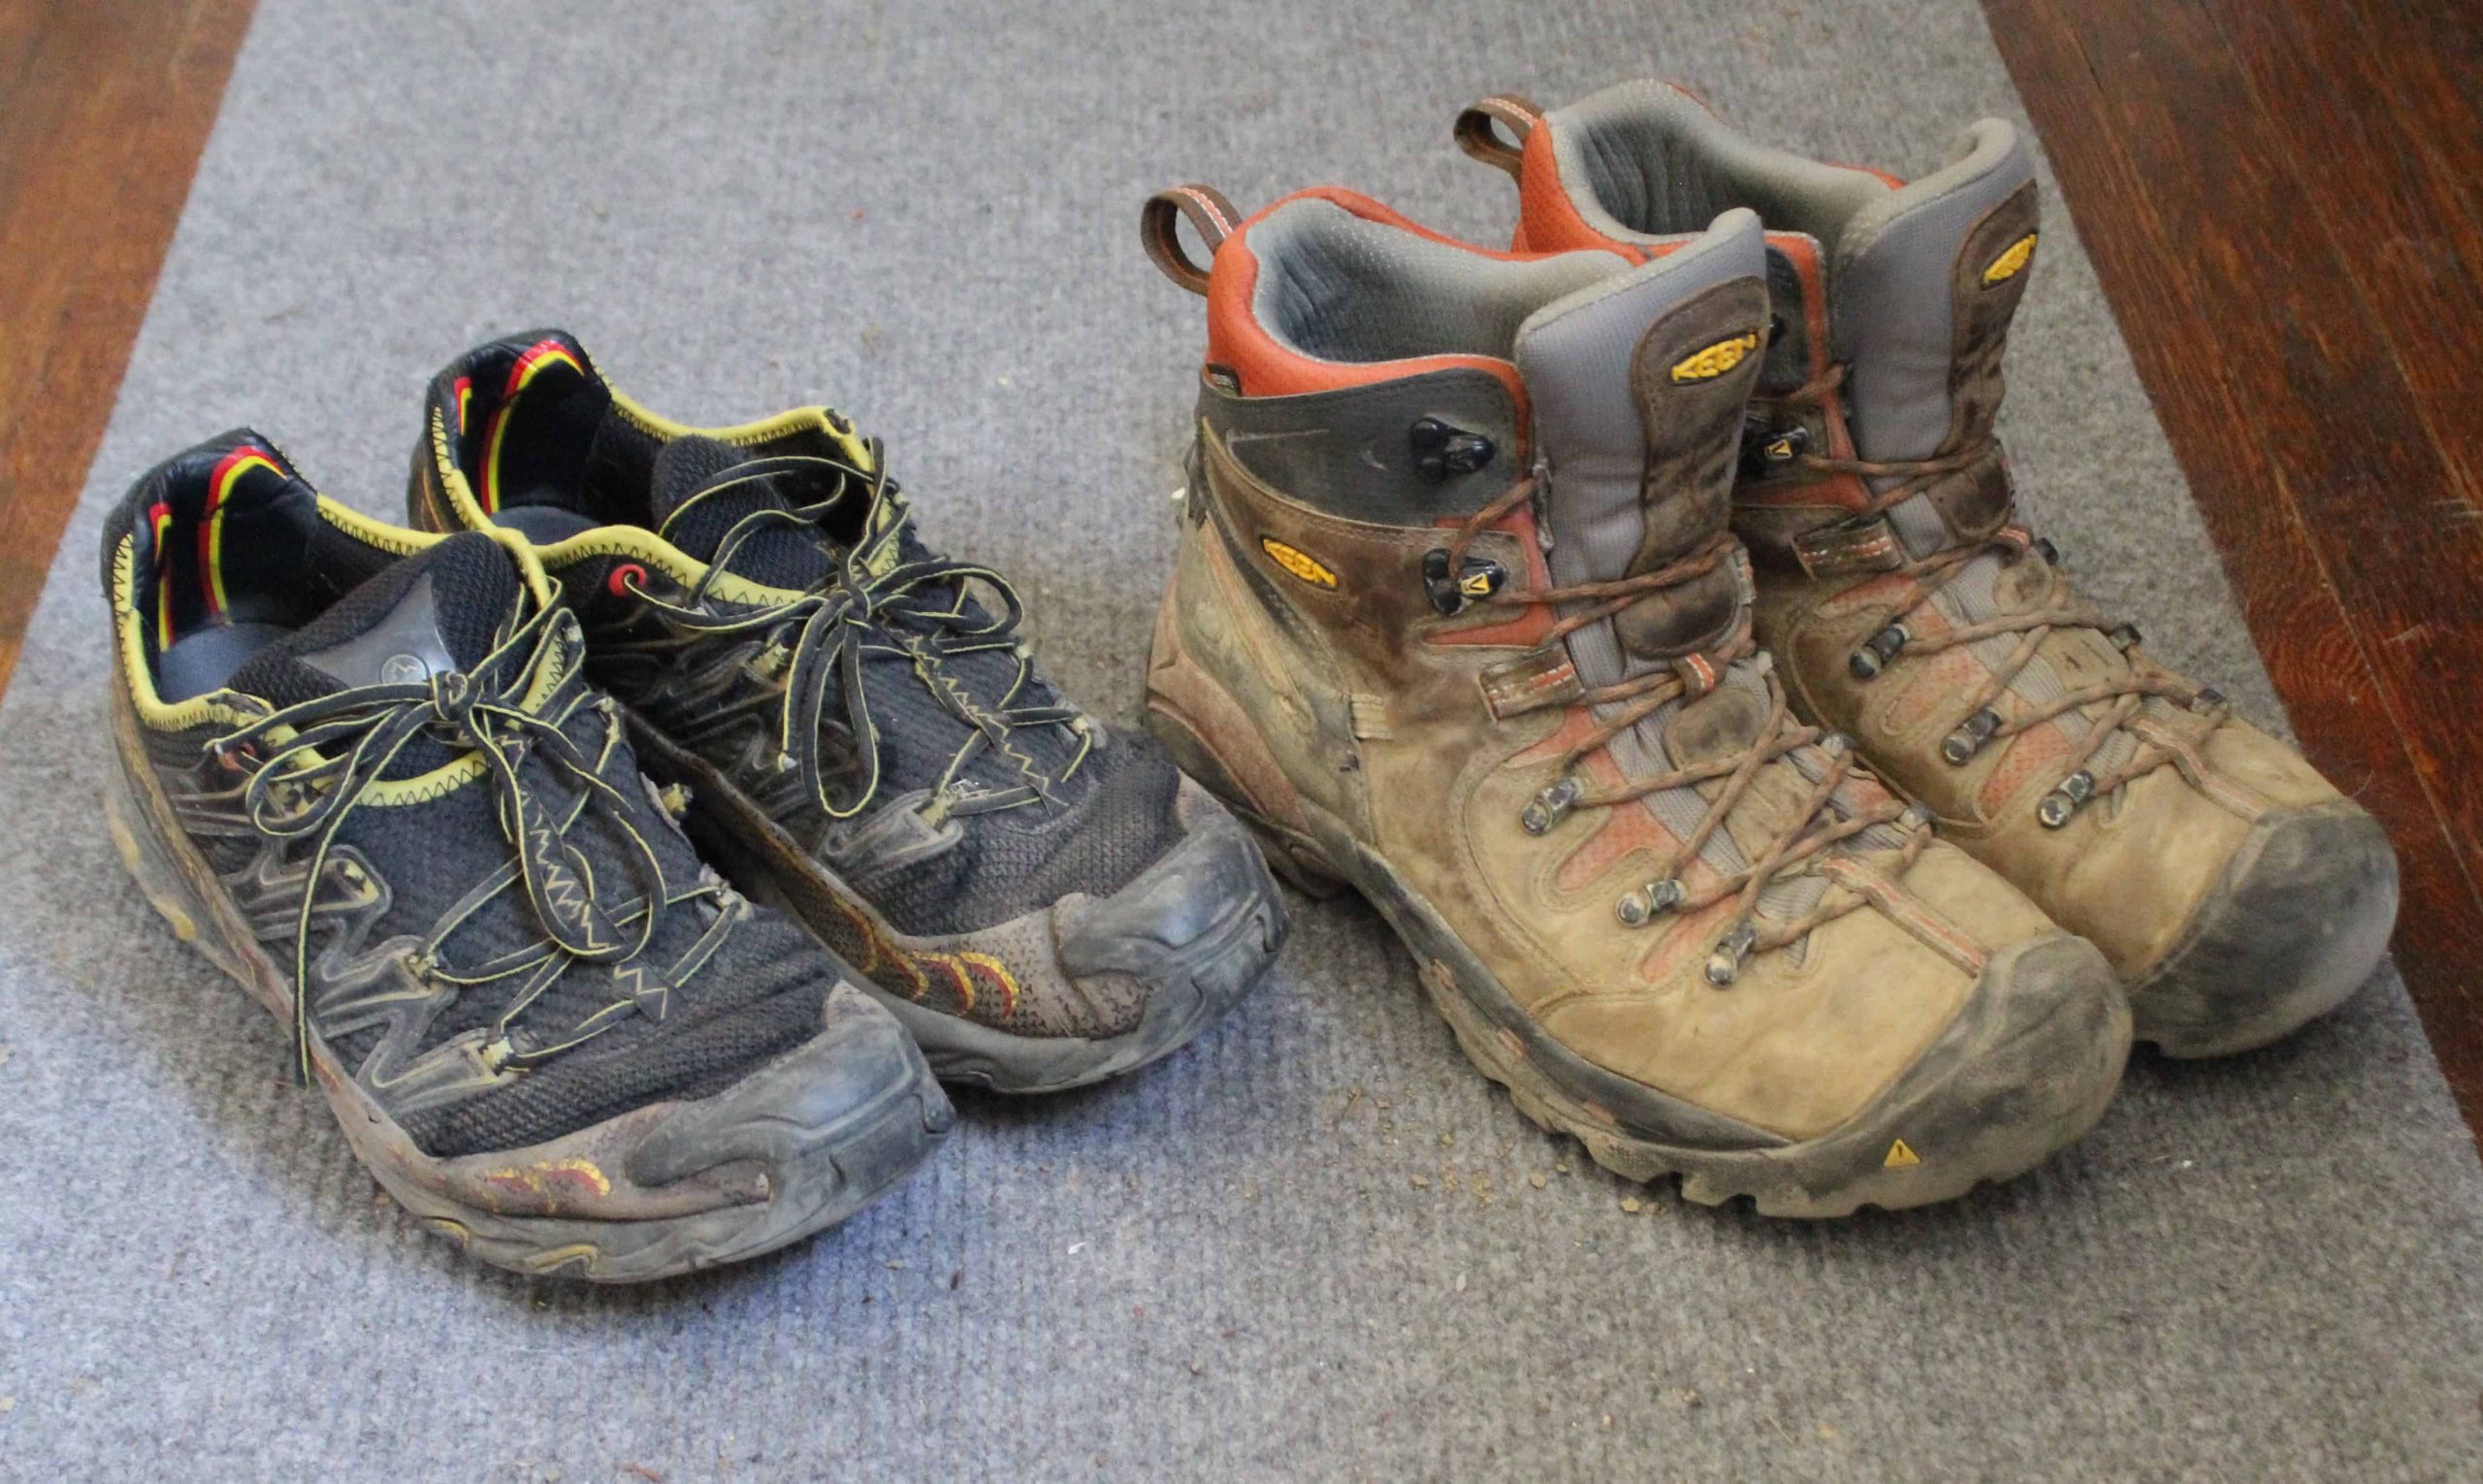 Hiking Boots or Trail Running Shoes